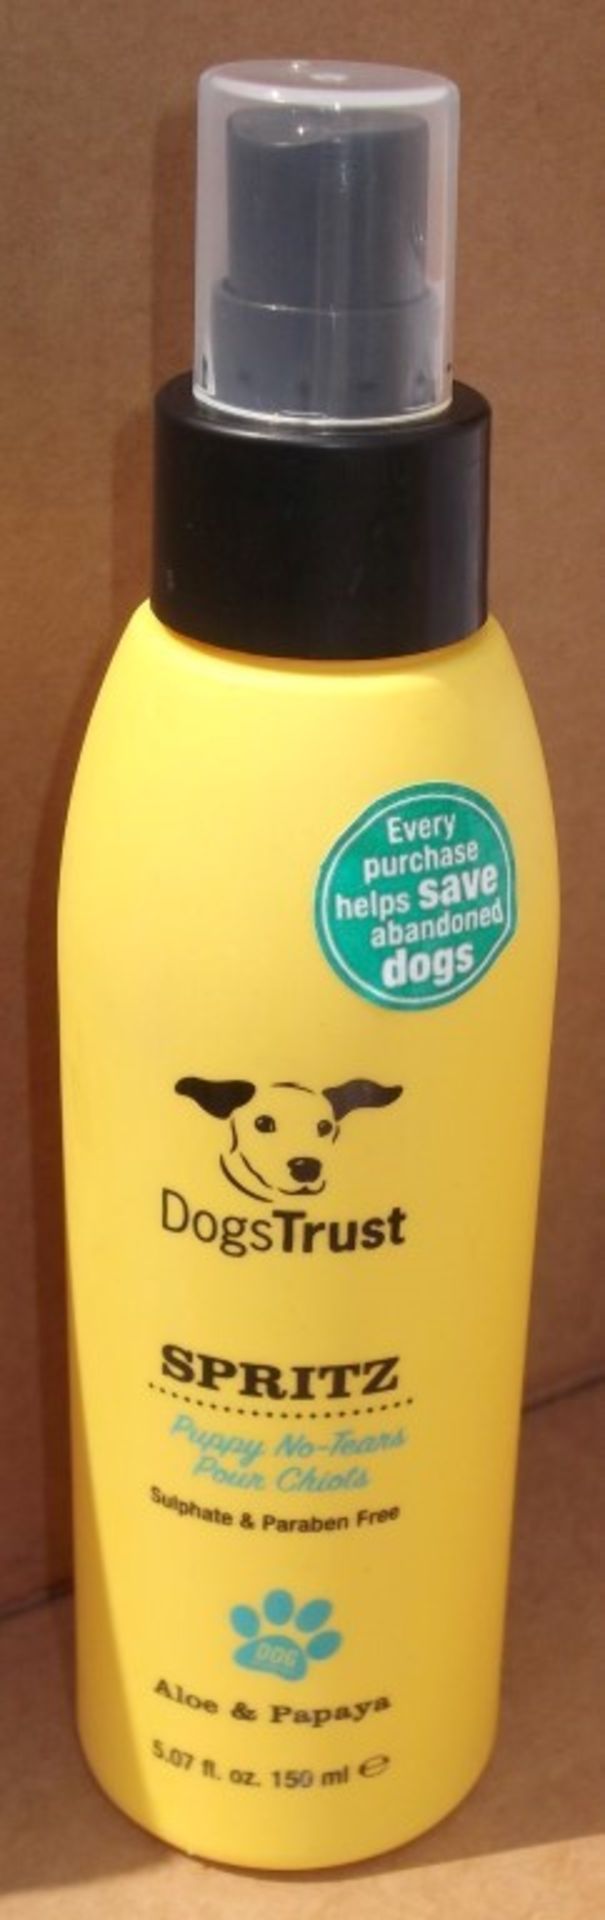 60 x Various Dogs Trust Shampoos and Conditioners - Brand New Stock - CL028 - Includes No Tears, - Image 5 of 16